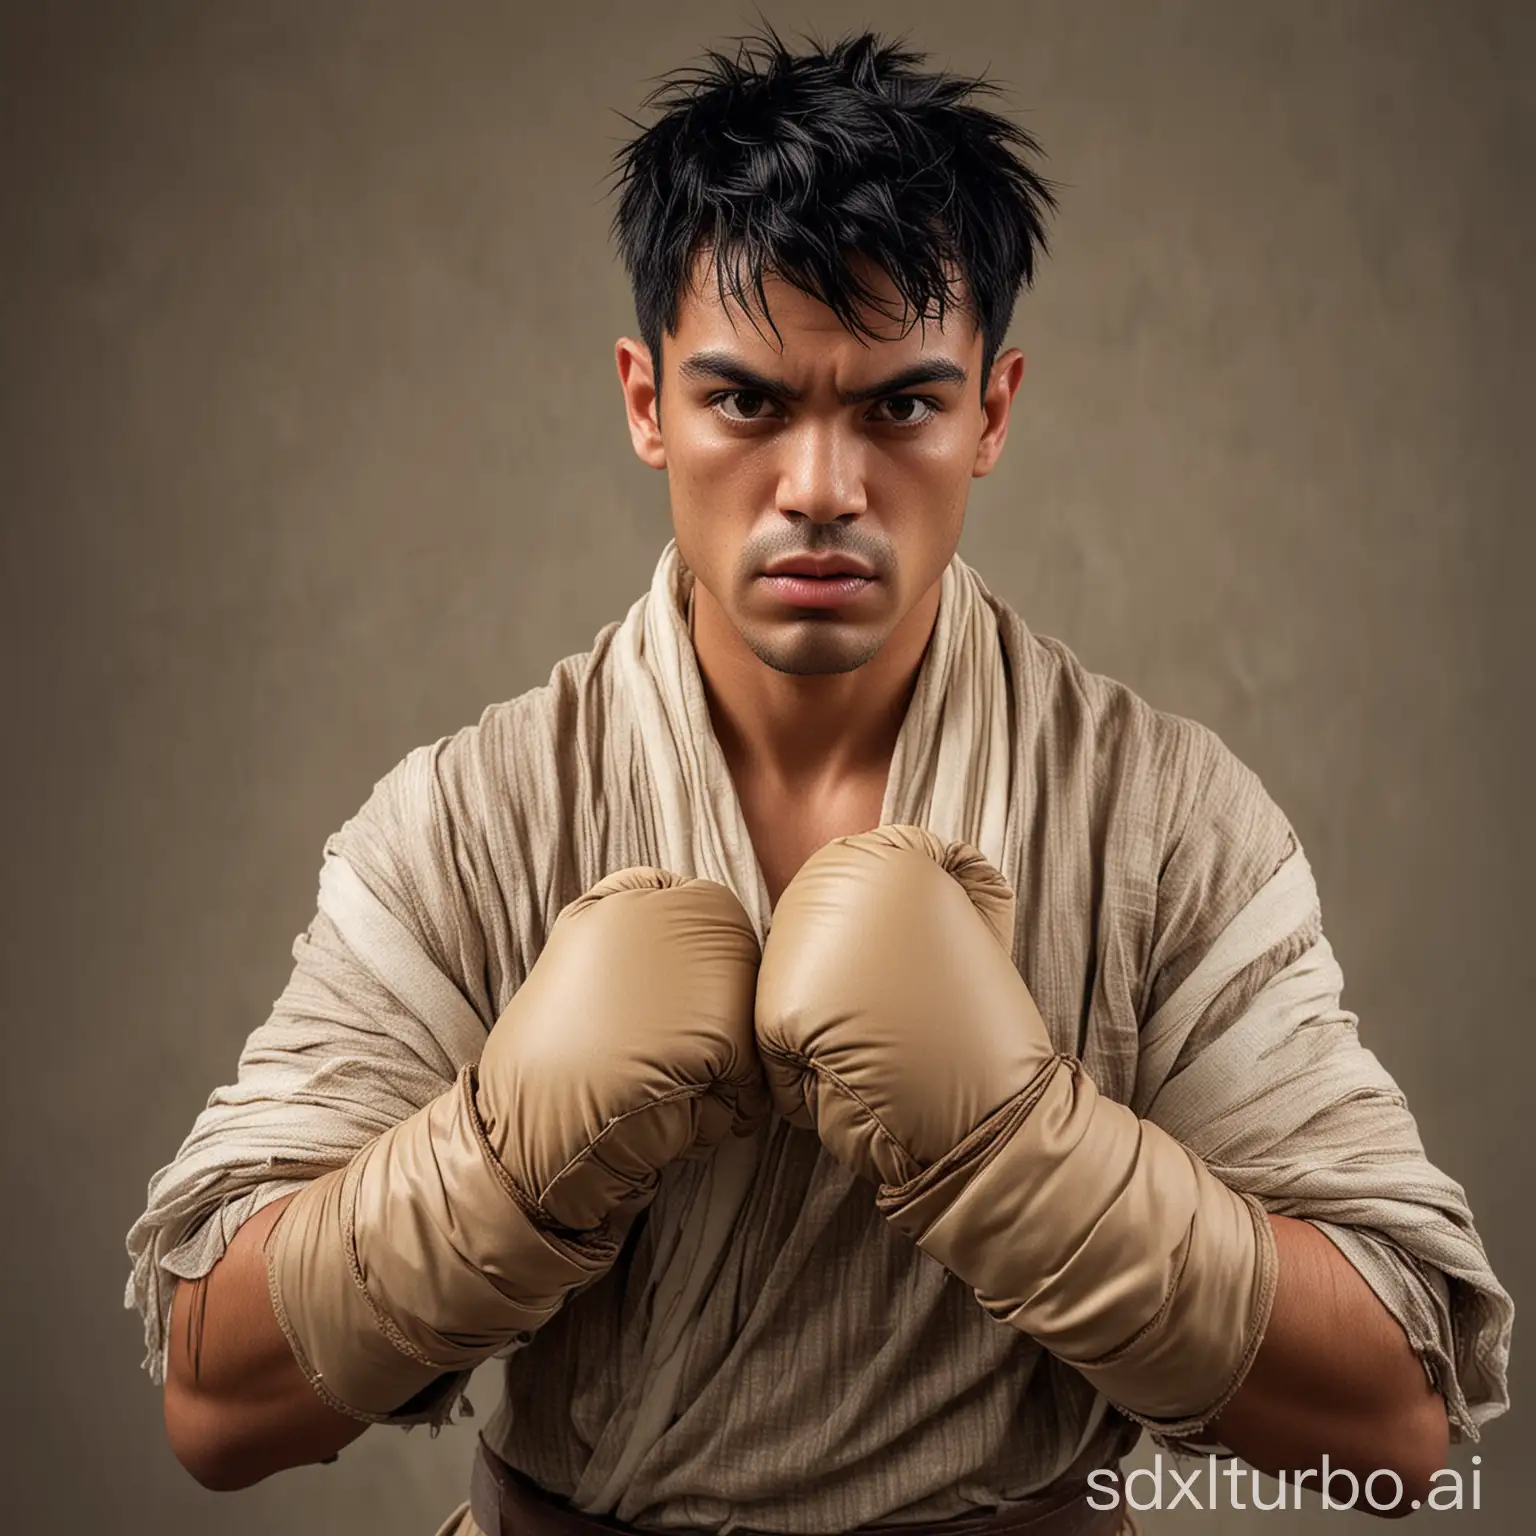 A boxer man with a square face wanting to fight, his hands are wrapped with strips of fabric, he is wearing a loose tunic. Black hair, olive skin, brown eyes, determined and hard